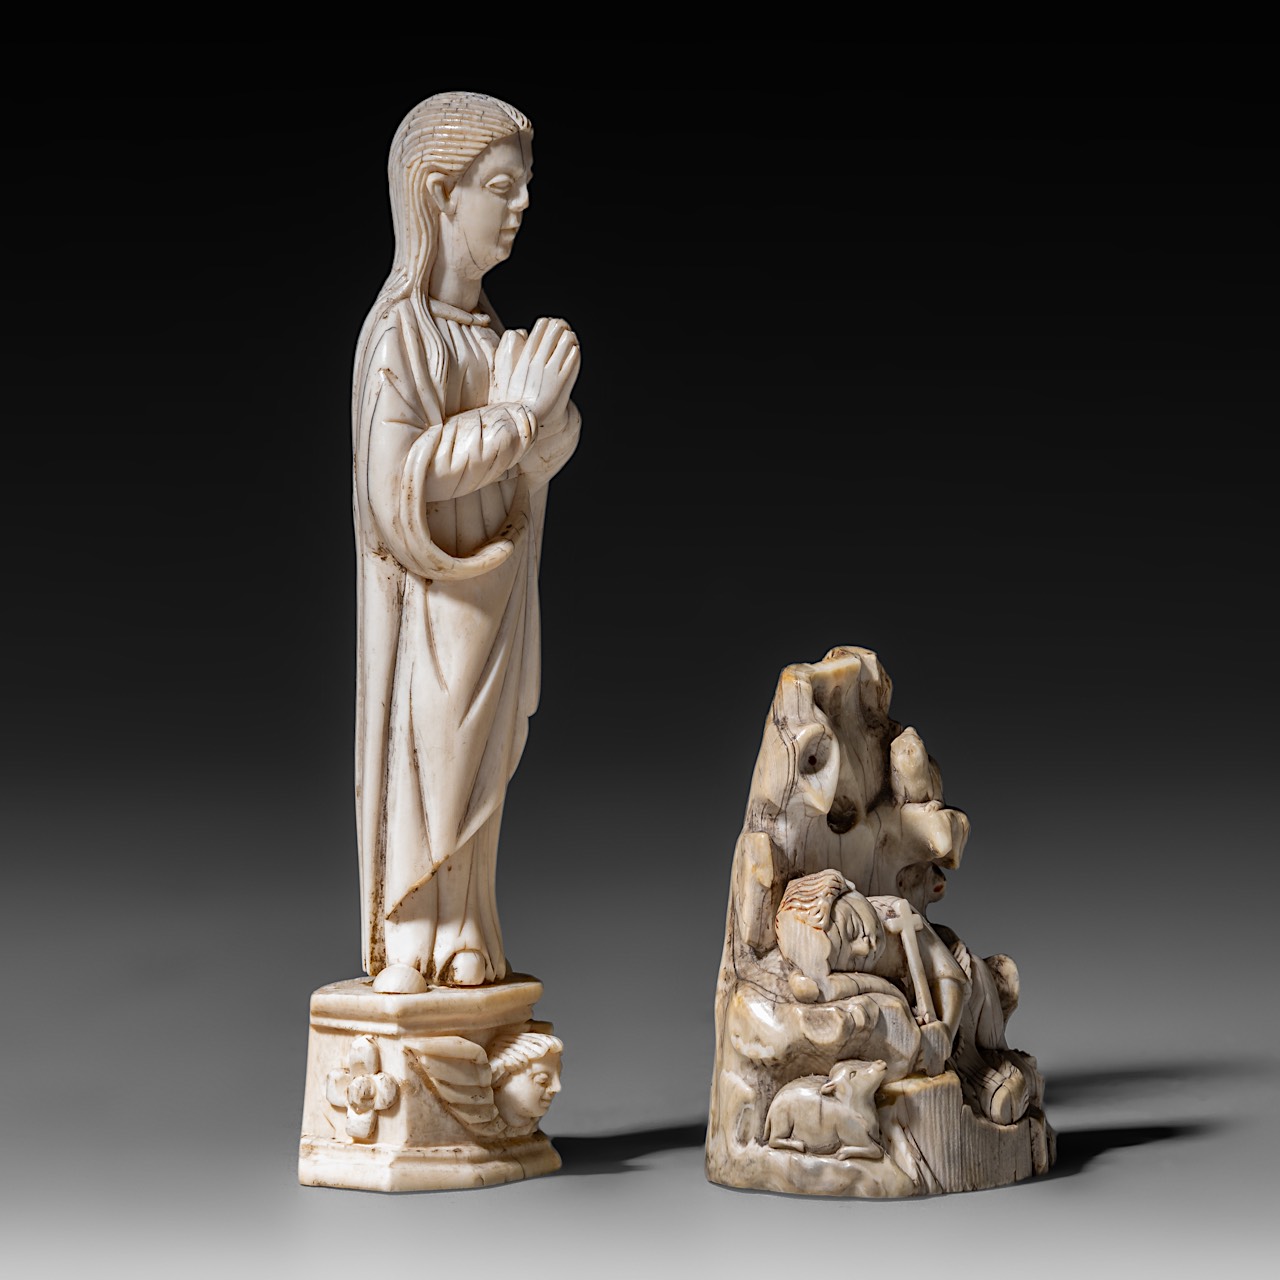 Two carved ivory Indo-Portuguese religious figures; one depicts an upright standing and praying Virg - Image 6 of 8